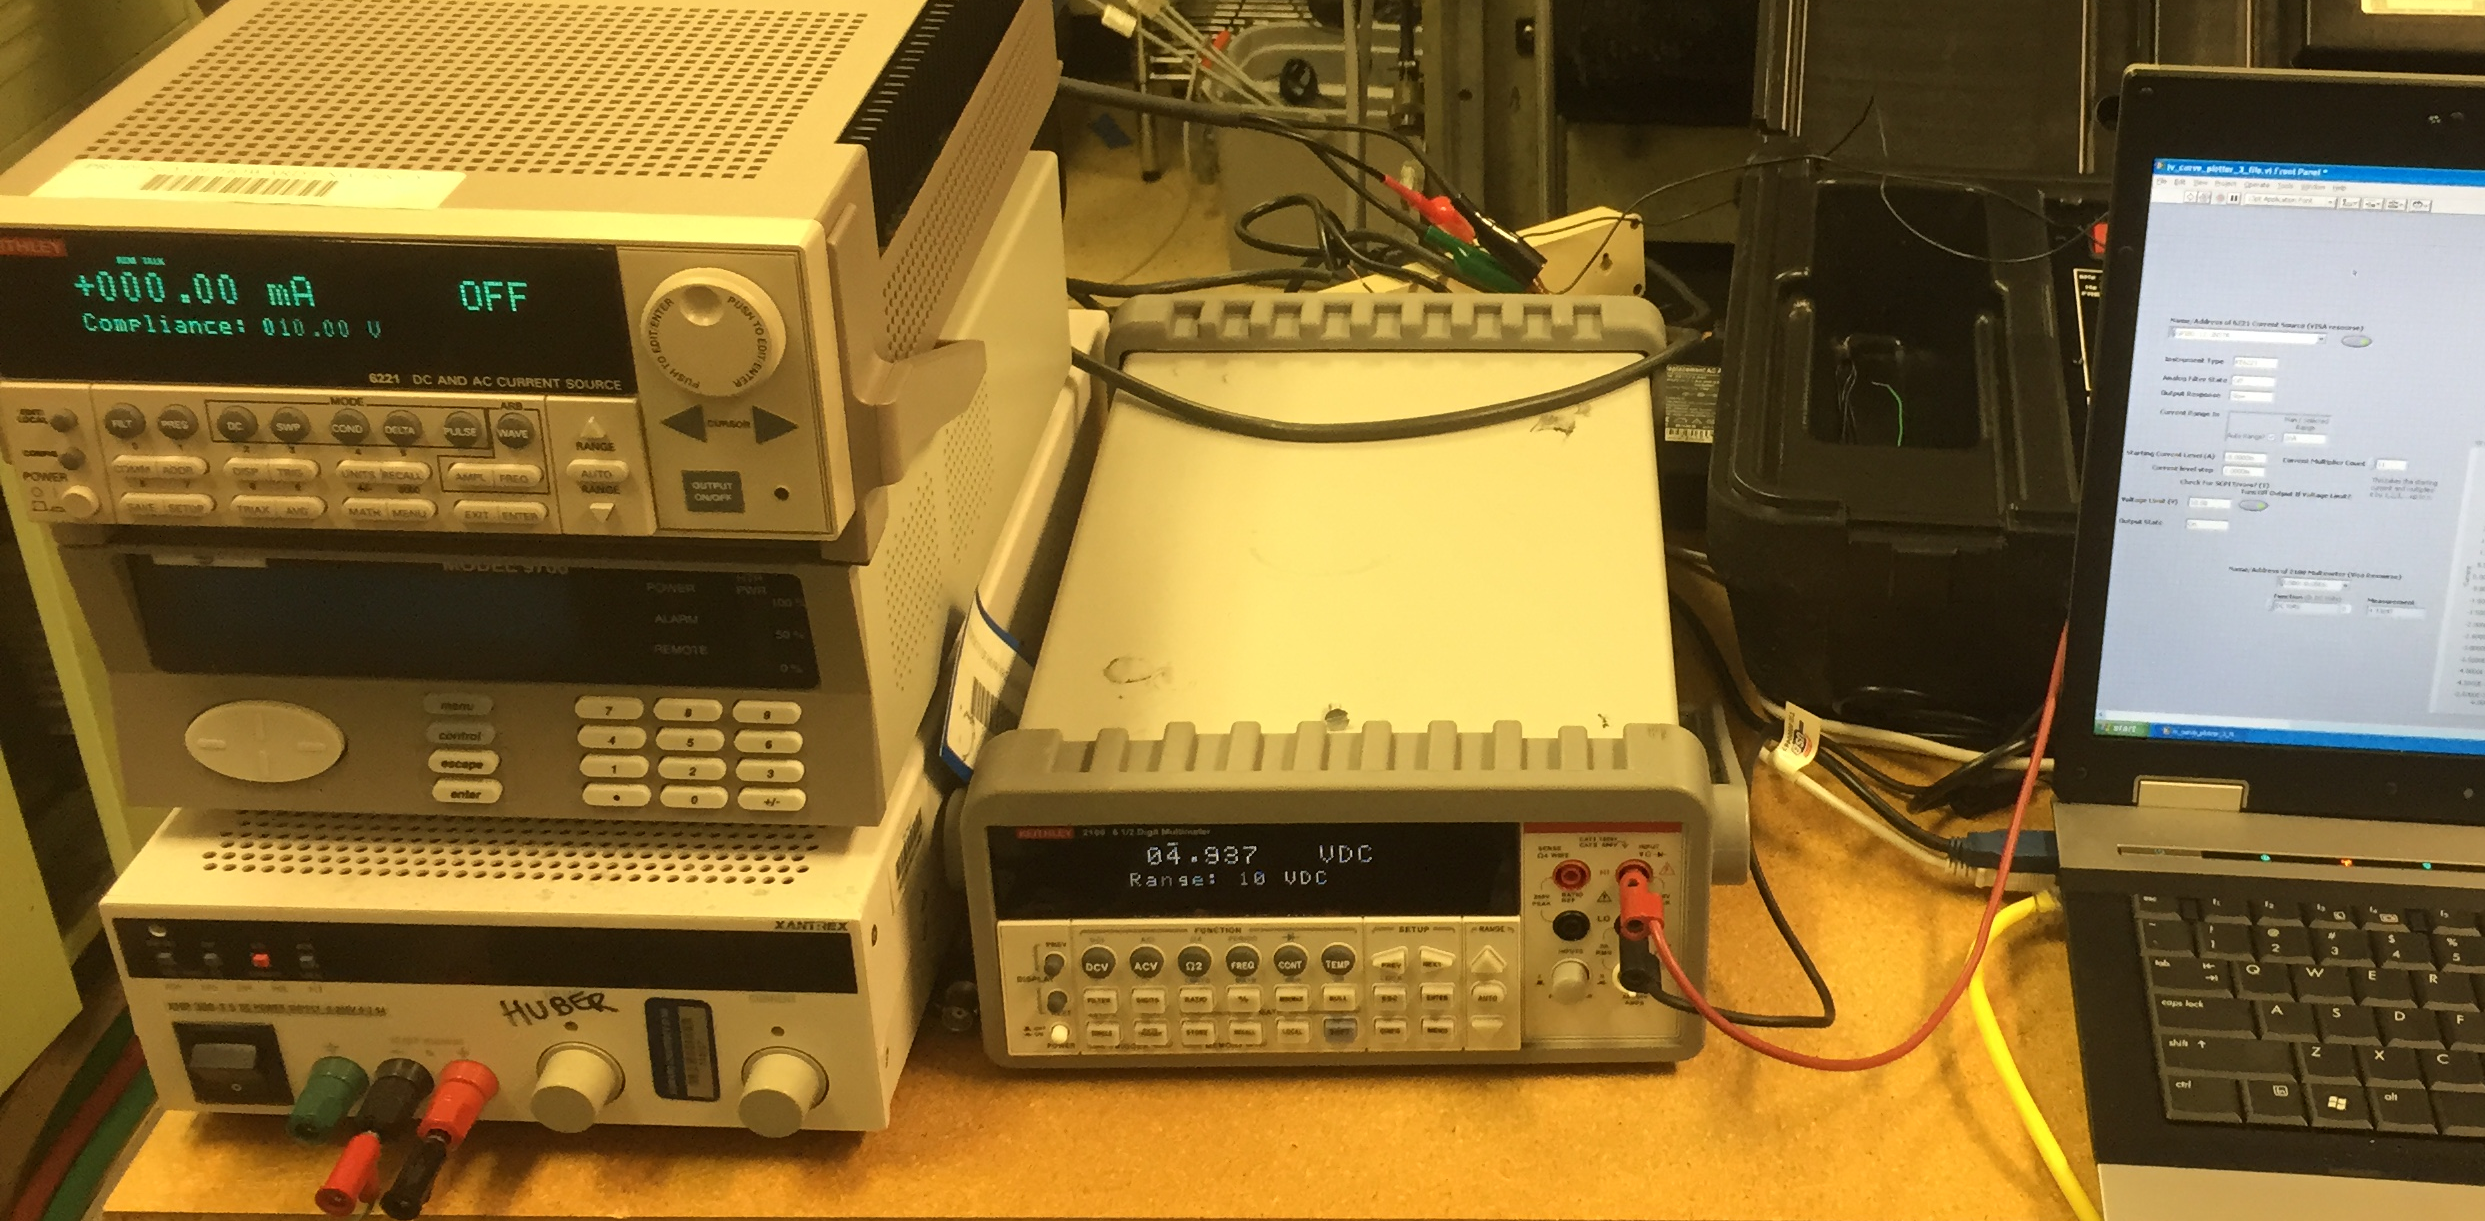 Here is the equipment that the LabVIEW program controlled for the simple Zener diode test. The actual circuit is behind the computer on a breadboard. Note: These instruments are overkill for this type of test as this test was meant to ensure operation, not the actual work.